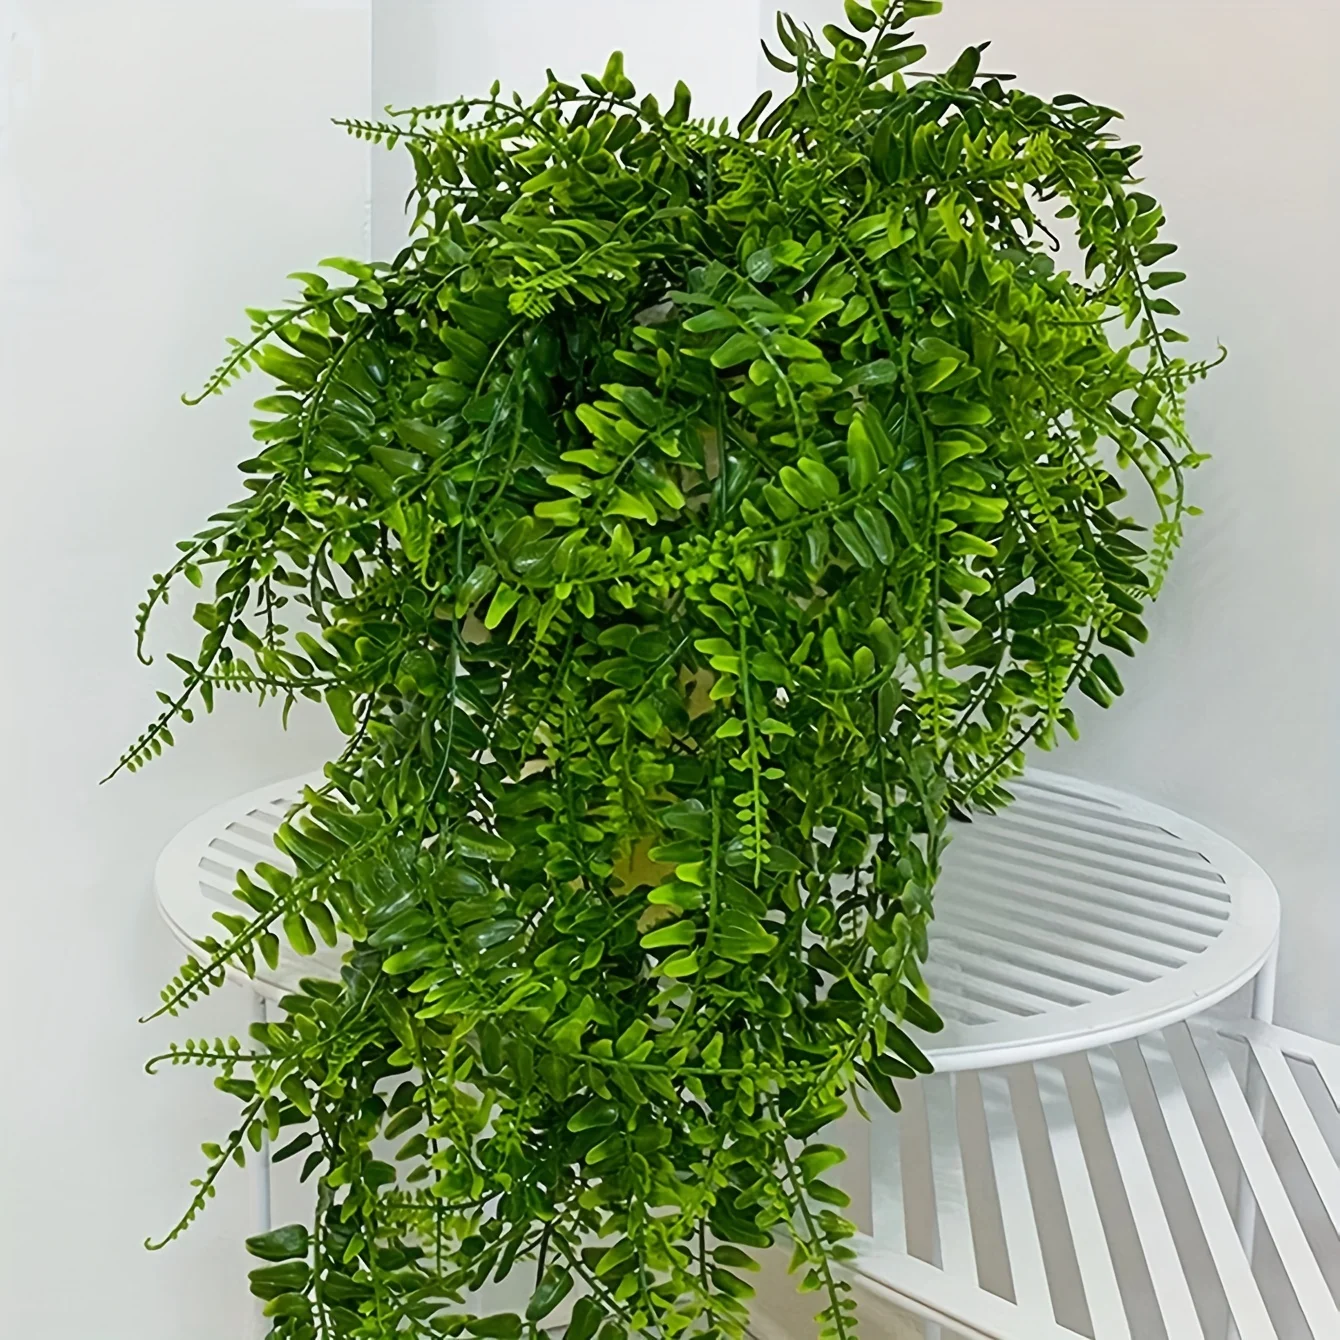 1pc-2pcs-90cm-35-43inch-Simulated-Wall-Hanging-Persian-Grass-Vine-Artificial-Hanging-Fern-Plant-Vine.jpg